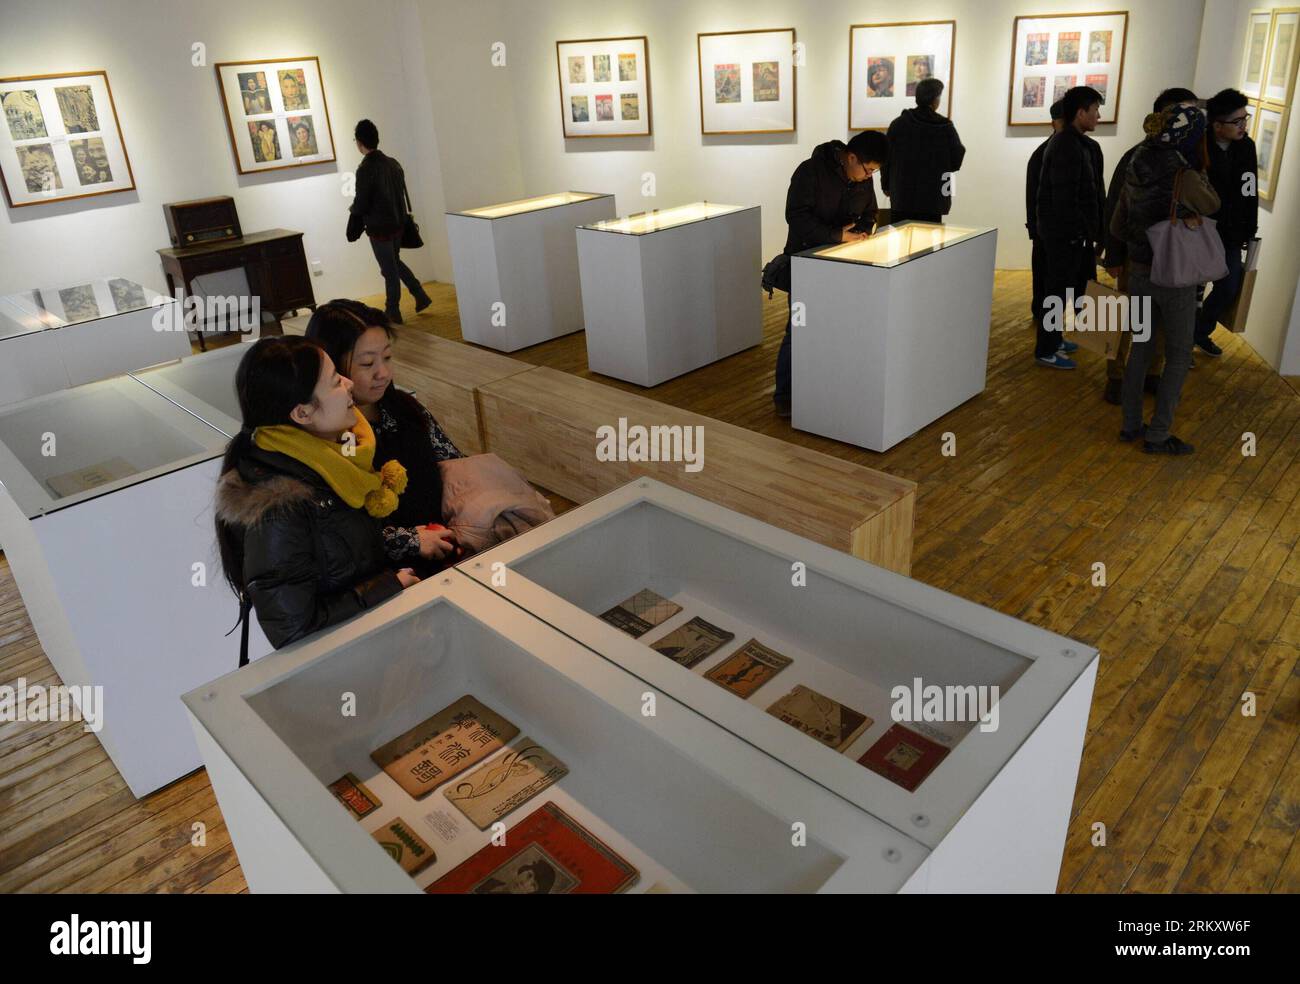 Bildnummer: 59092918  Datum: 16.01.2013  Copyright: imago/Xinhua (130116) -- XI AN, Jan. 16, 2013 (Xinhua) -- Visitors watch old books at an exhibition of books and magazines publicized during the Republic of China period (1912-1949) in Xi an, capital of northwest China s Shaanxi Province, Jan. 16, 2013. The exhibition showed more than 300 books and magzines collected by collector Gao Xiaolong and Nan Zhaoxu. (Xinhua/Li Yibo) (zkr) CHINA-XI AN-OLD BOOK EXHIBITION(CN) PUBLICATIONxNOTxINxCHN Kultur Ausstellung Buch Buchausstellung Medien Mediengeschichte Literaturgeschichte x0x xdd 2013 quer Stock Photo